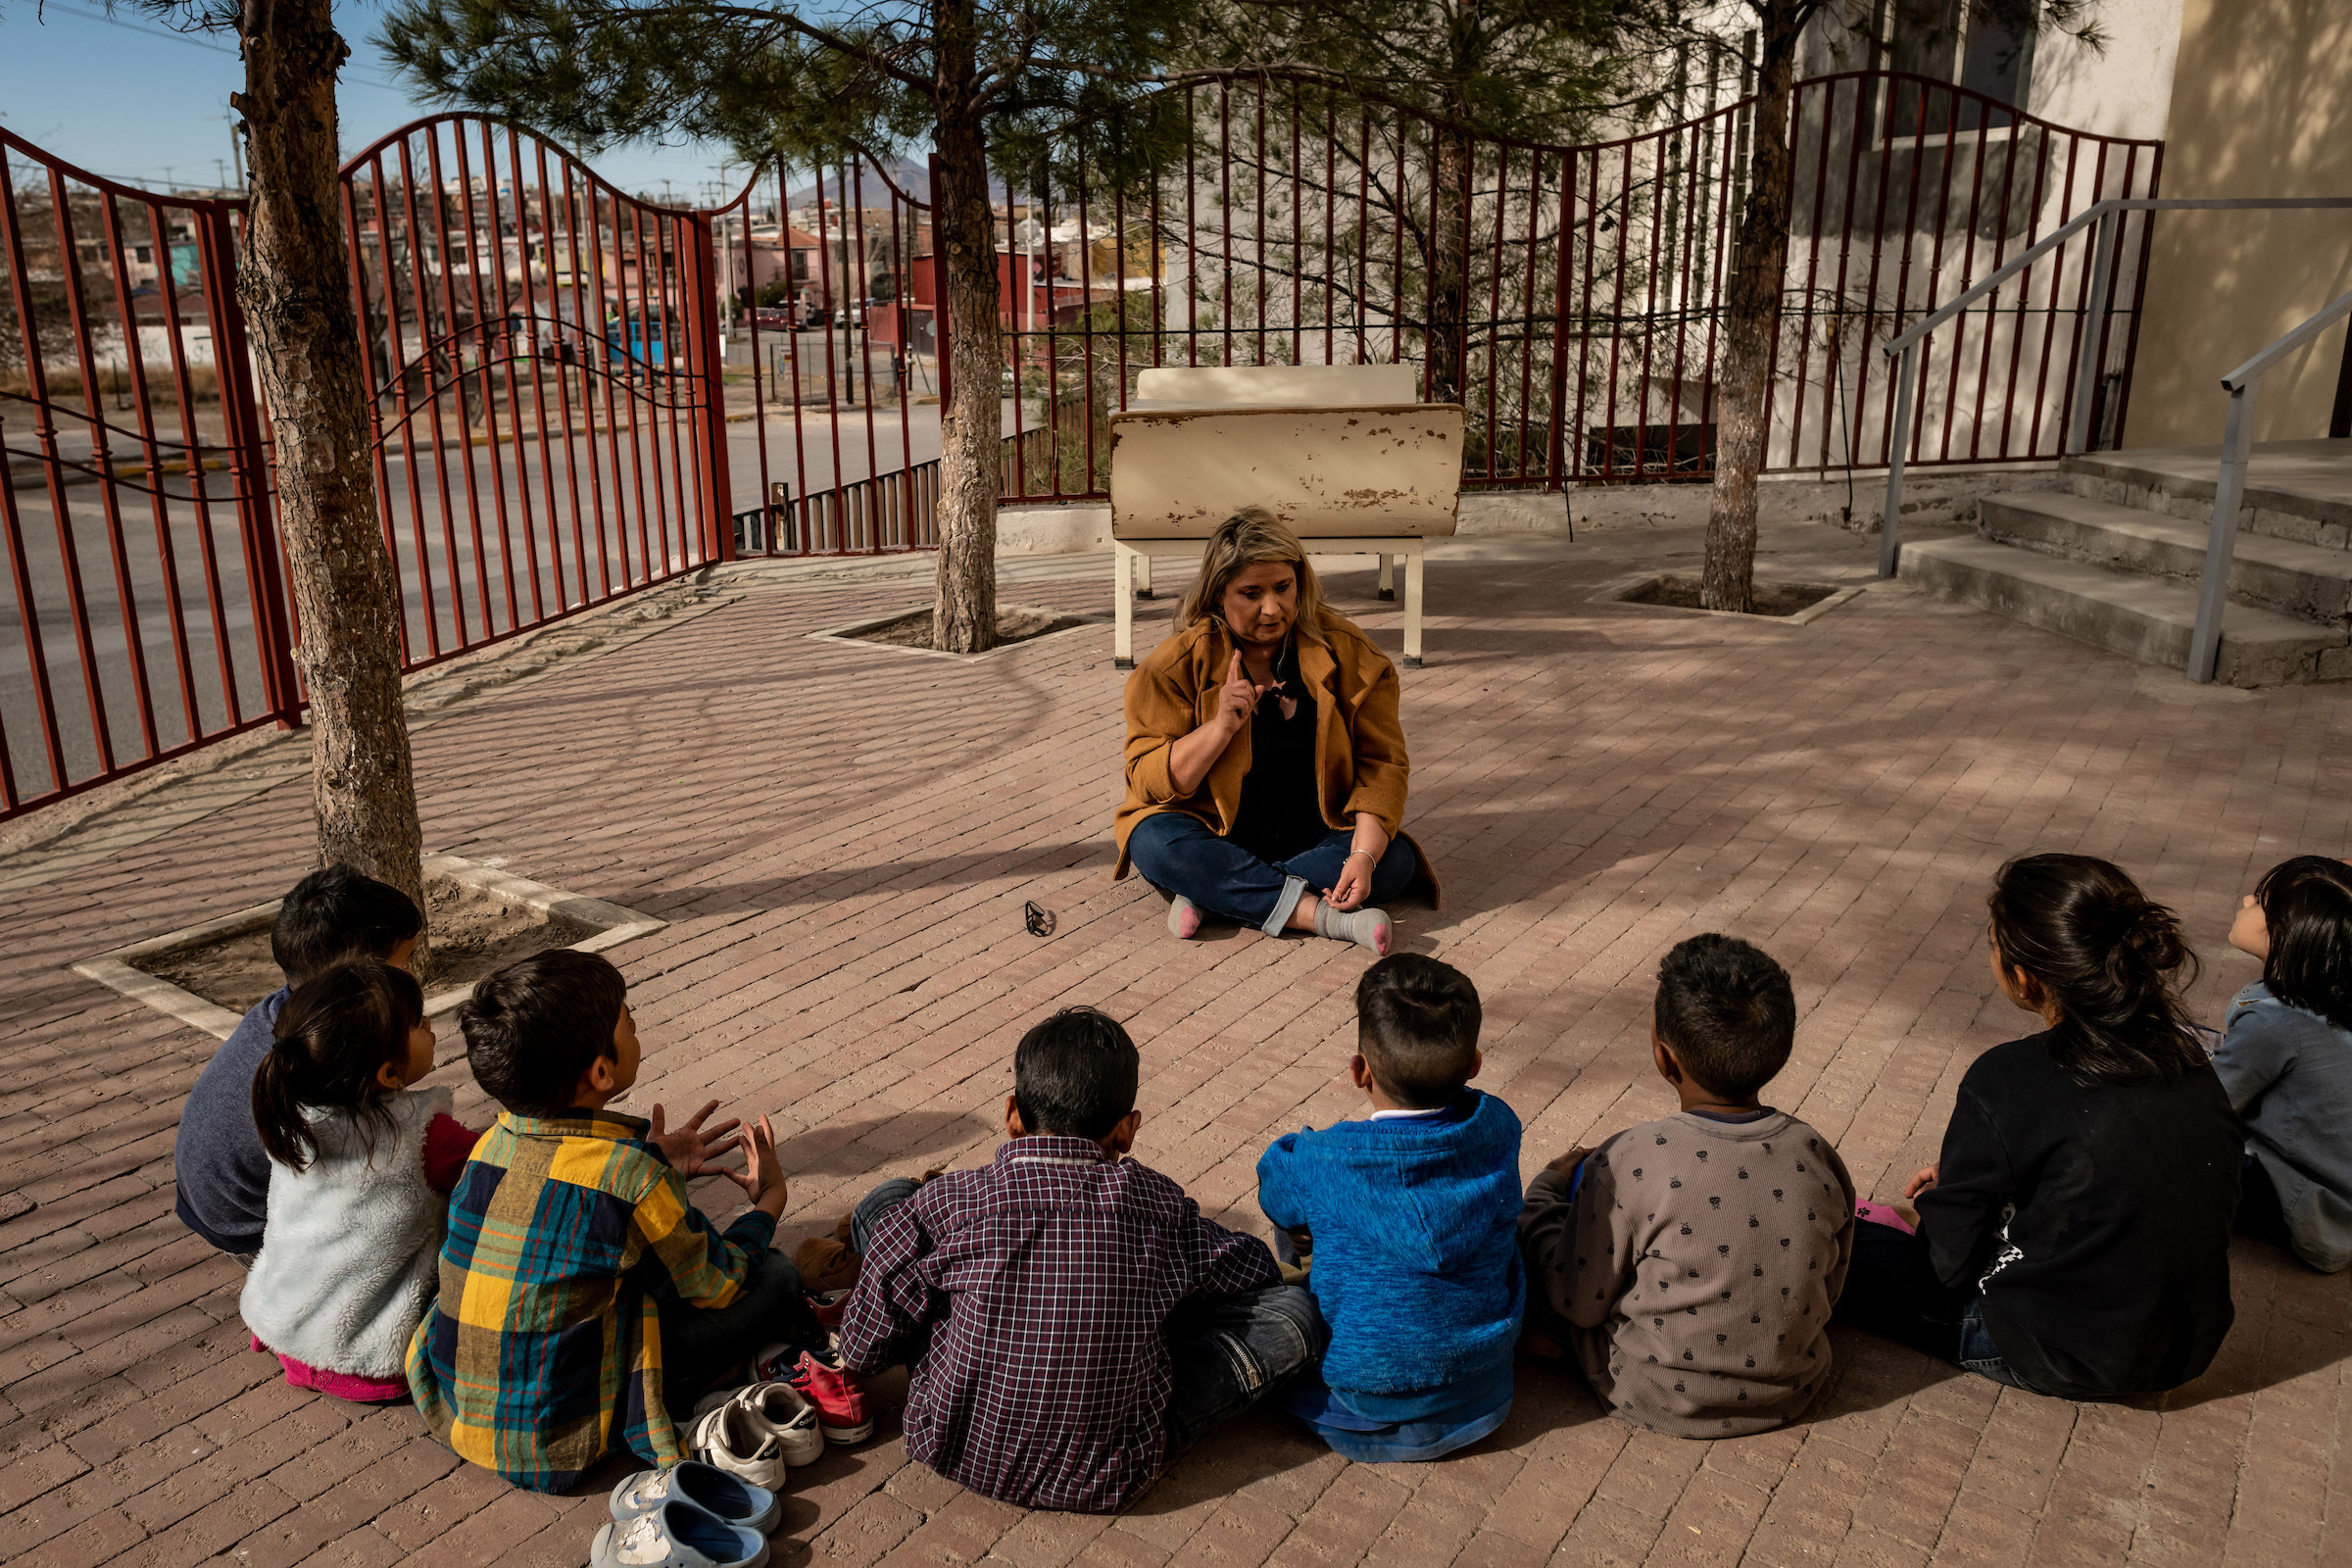 Psychologist Patricia Galarza leads a group therapy session about how to say goodbye to your friends with the children living at the San Juan Apóstol migrant shelter. The children will soon be separated from each other as the government starts processing asylum seekers under MPP into the U.S.